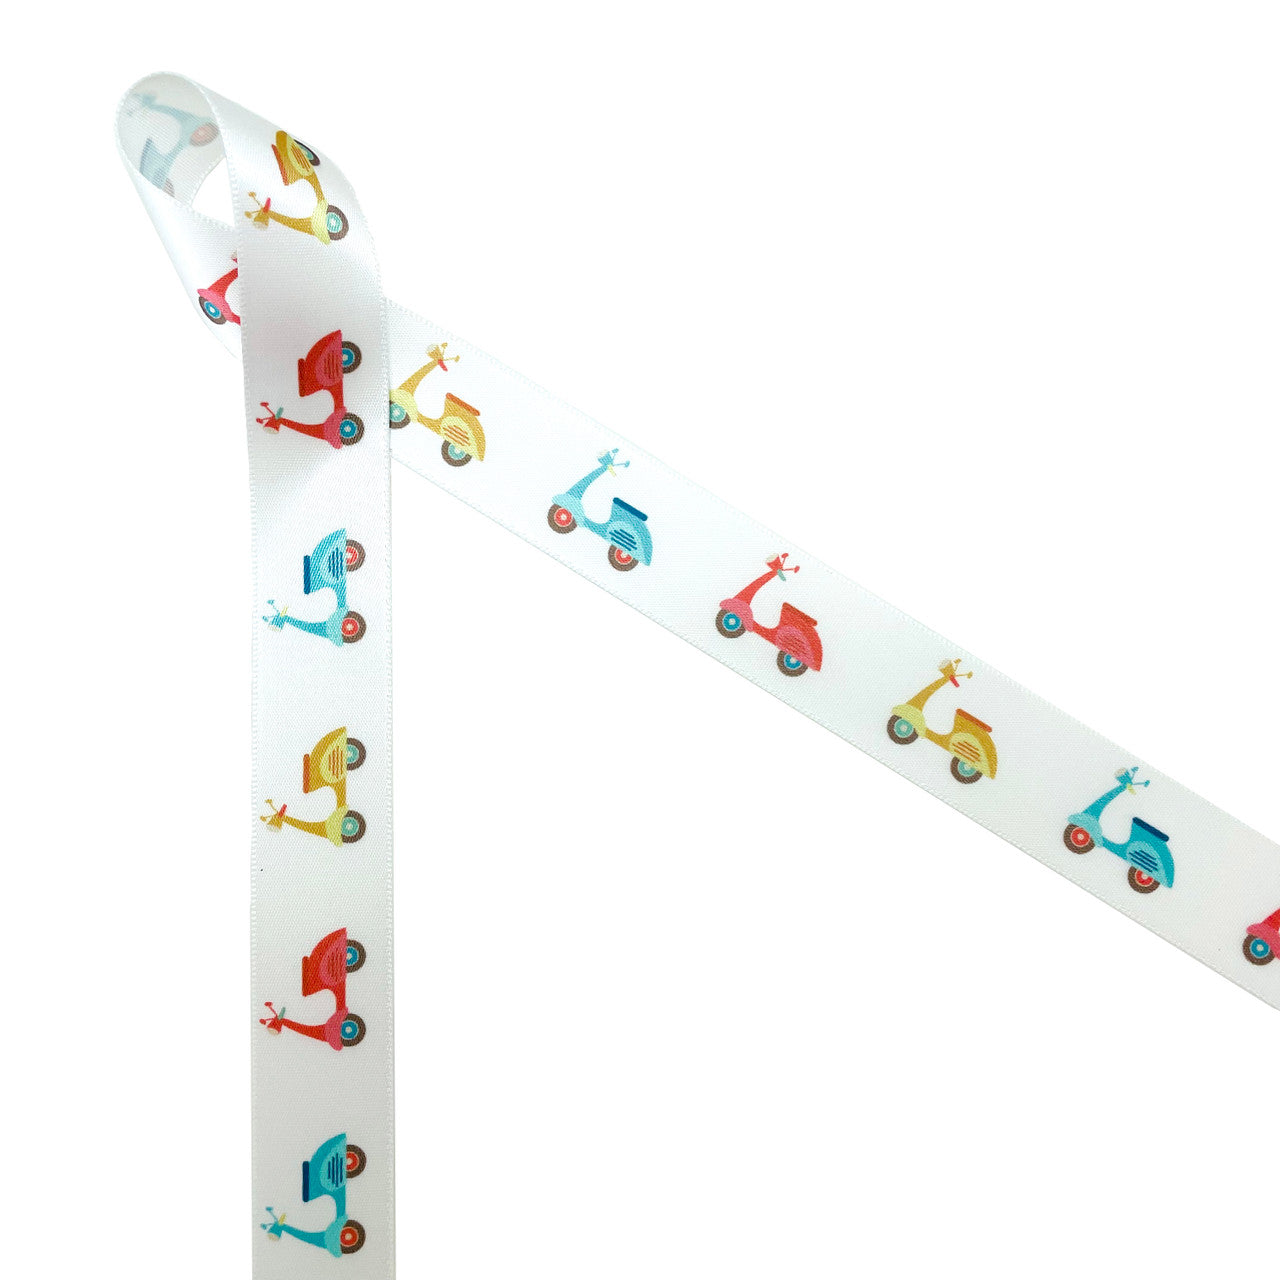 Adorable Vespa inspired scooters in vintage colors of blue, yellow, red and green  printed on 5/8" white single face satin ribbon is ideal for Spring and Summer party themes! This is an ideal ribbon for party decor, gift wrap, gift baskets, bridal showers and baby showers. Use this ribbon for crafting, sewing and quilting too! Our ribbon is designed and printed in the USA